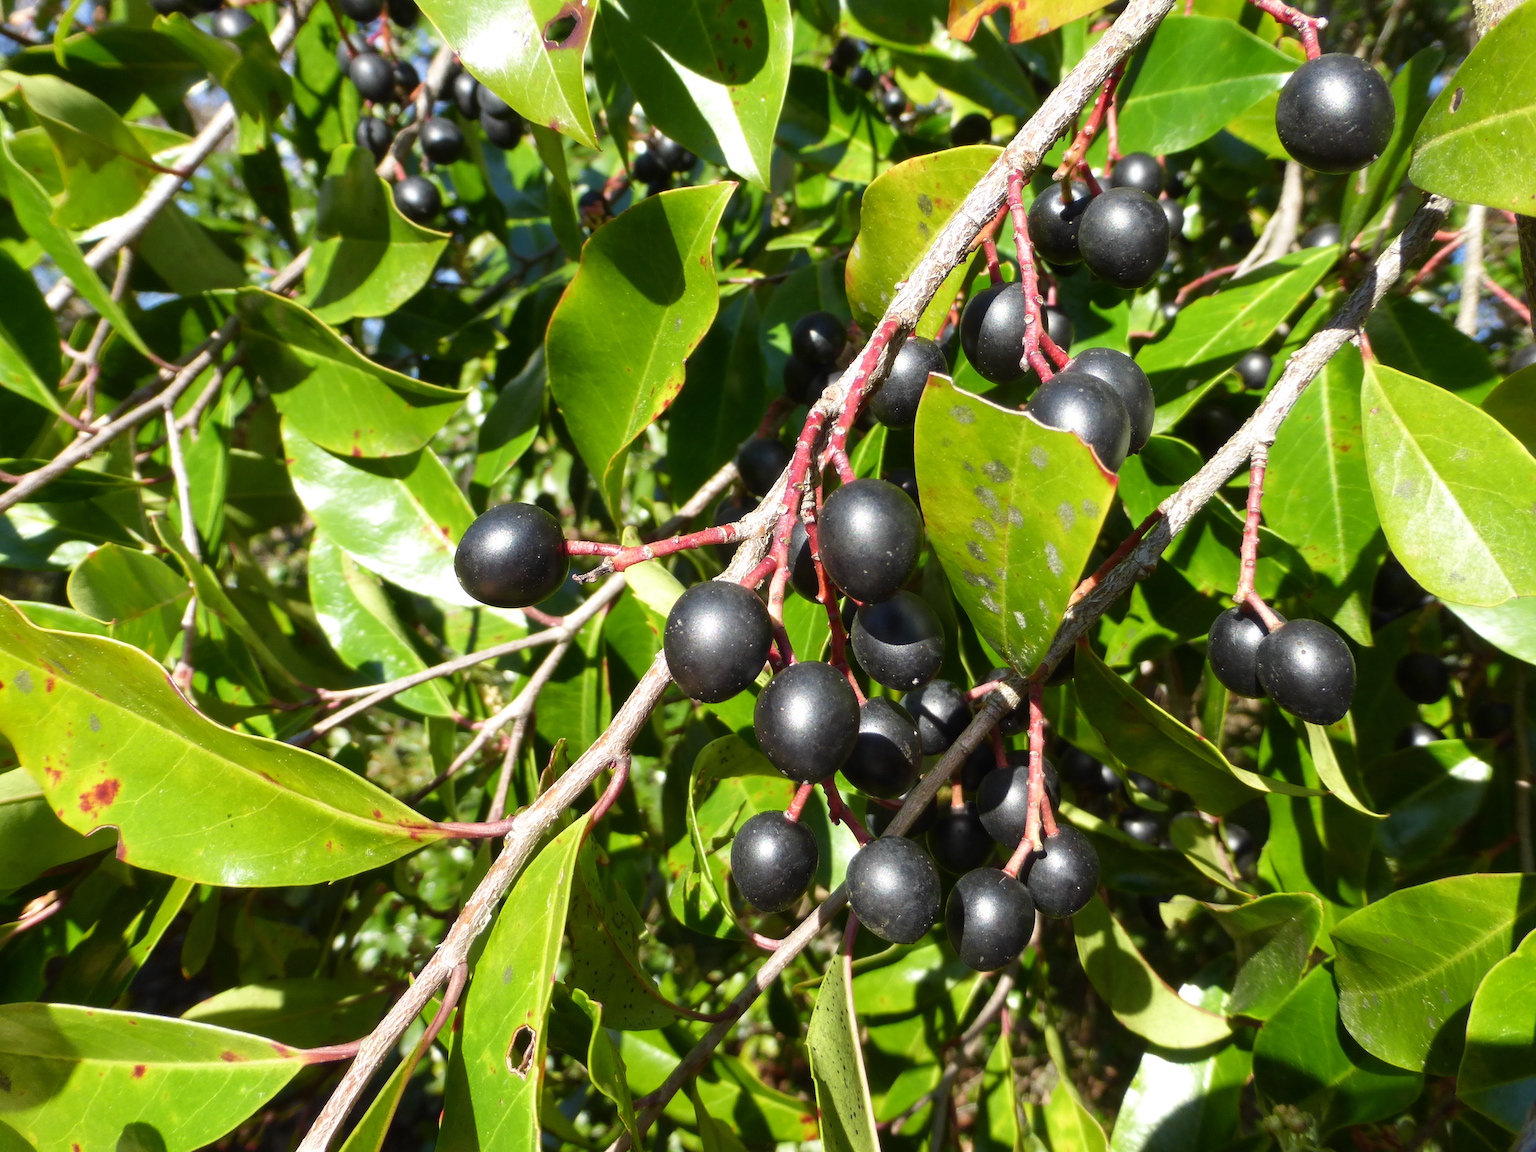 The Scientific Name is Prunus caroliniana [= Laurocerasus caroliniana]. You will likely hear them called Carolina Laurel Cherry. This picture shows the Evergreen leaves and drupes. of Prunus caroliniana [= Laurocerasus caroliniana]